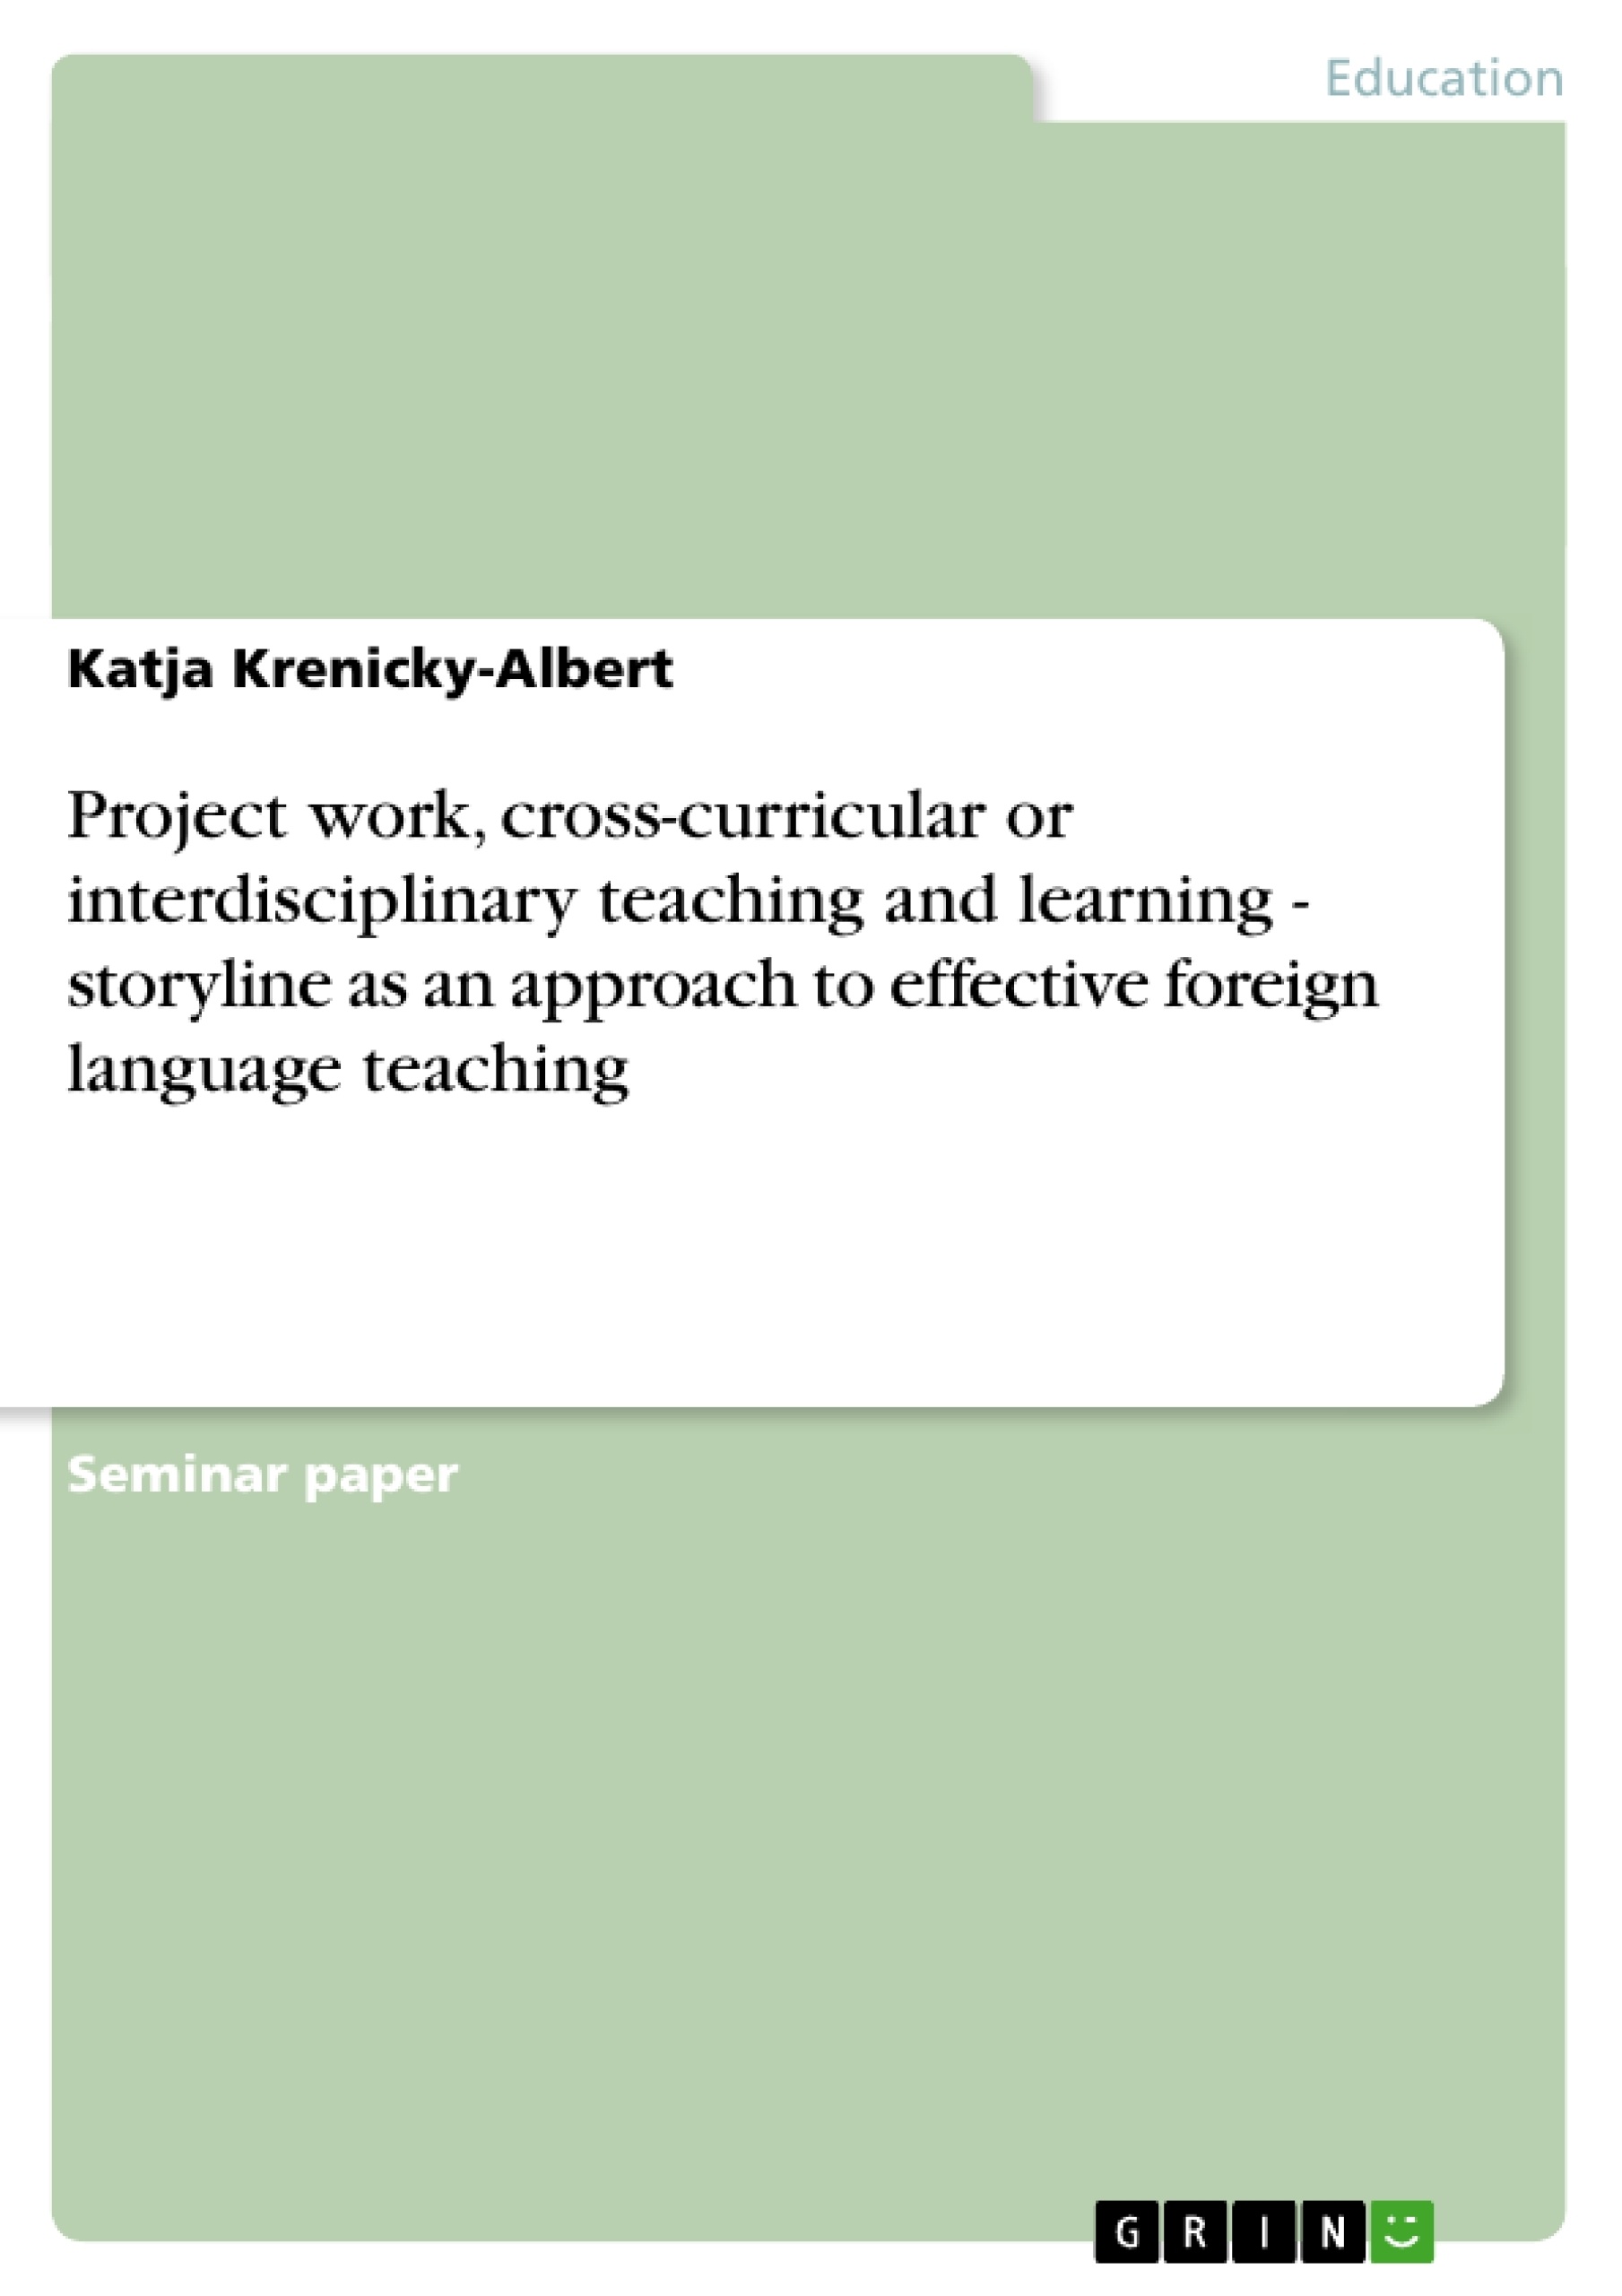 Titel: Project work, cross-curricular or interdisciplinary teaching and learning - storyline as an approach to effective foreign language teaching